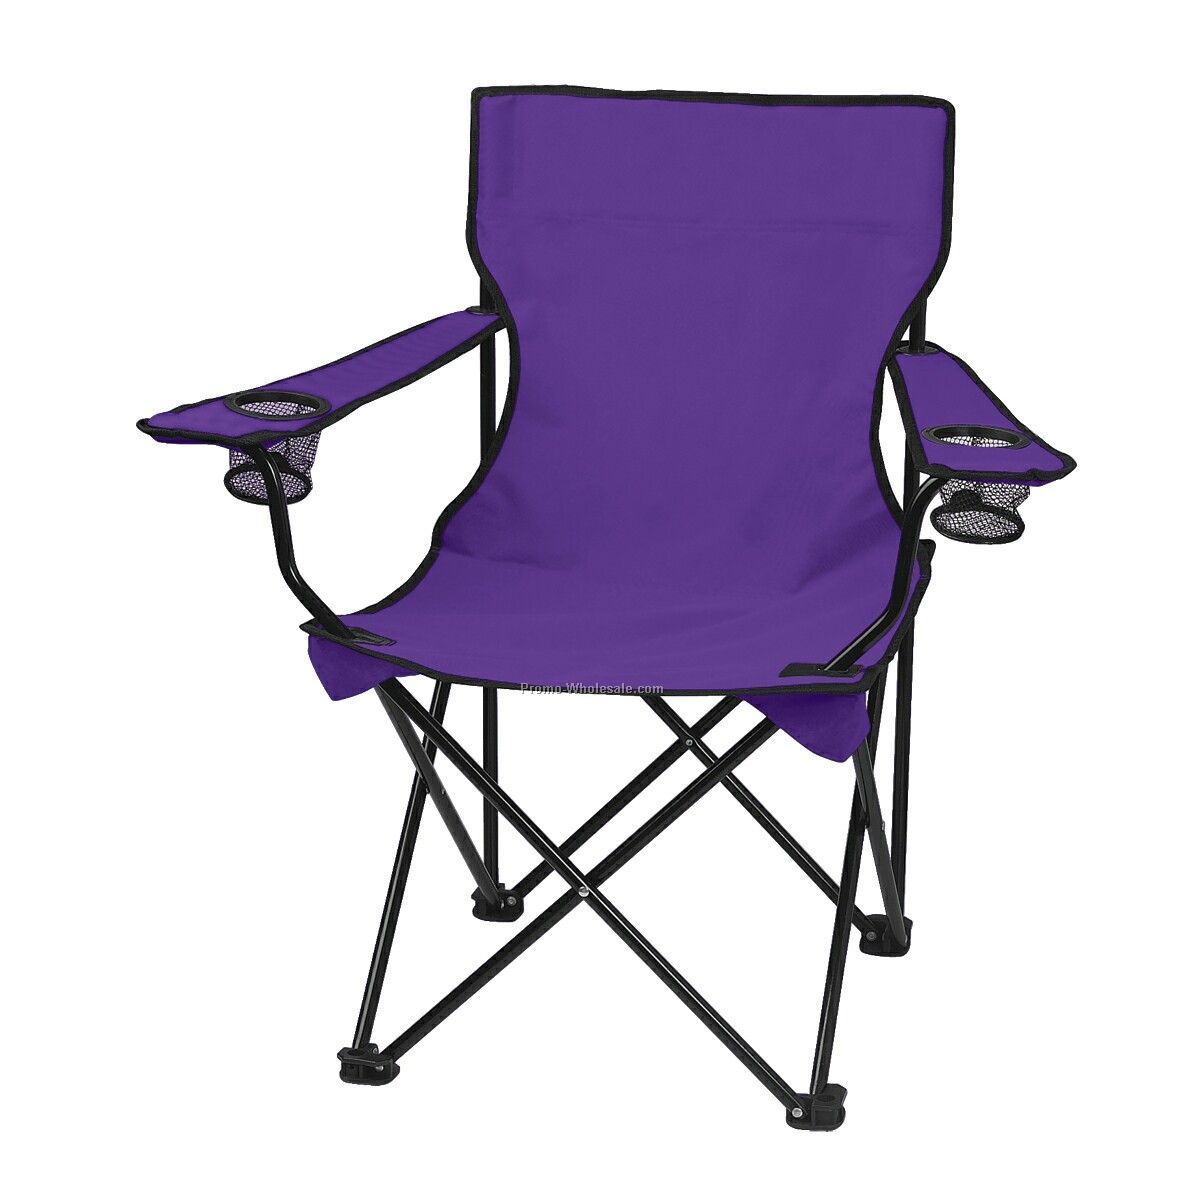 Folding Chair With Carrying Bag - Solid Color (Blank)